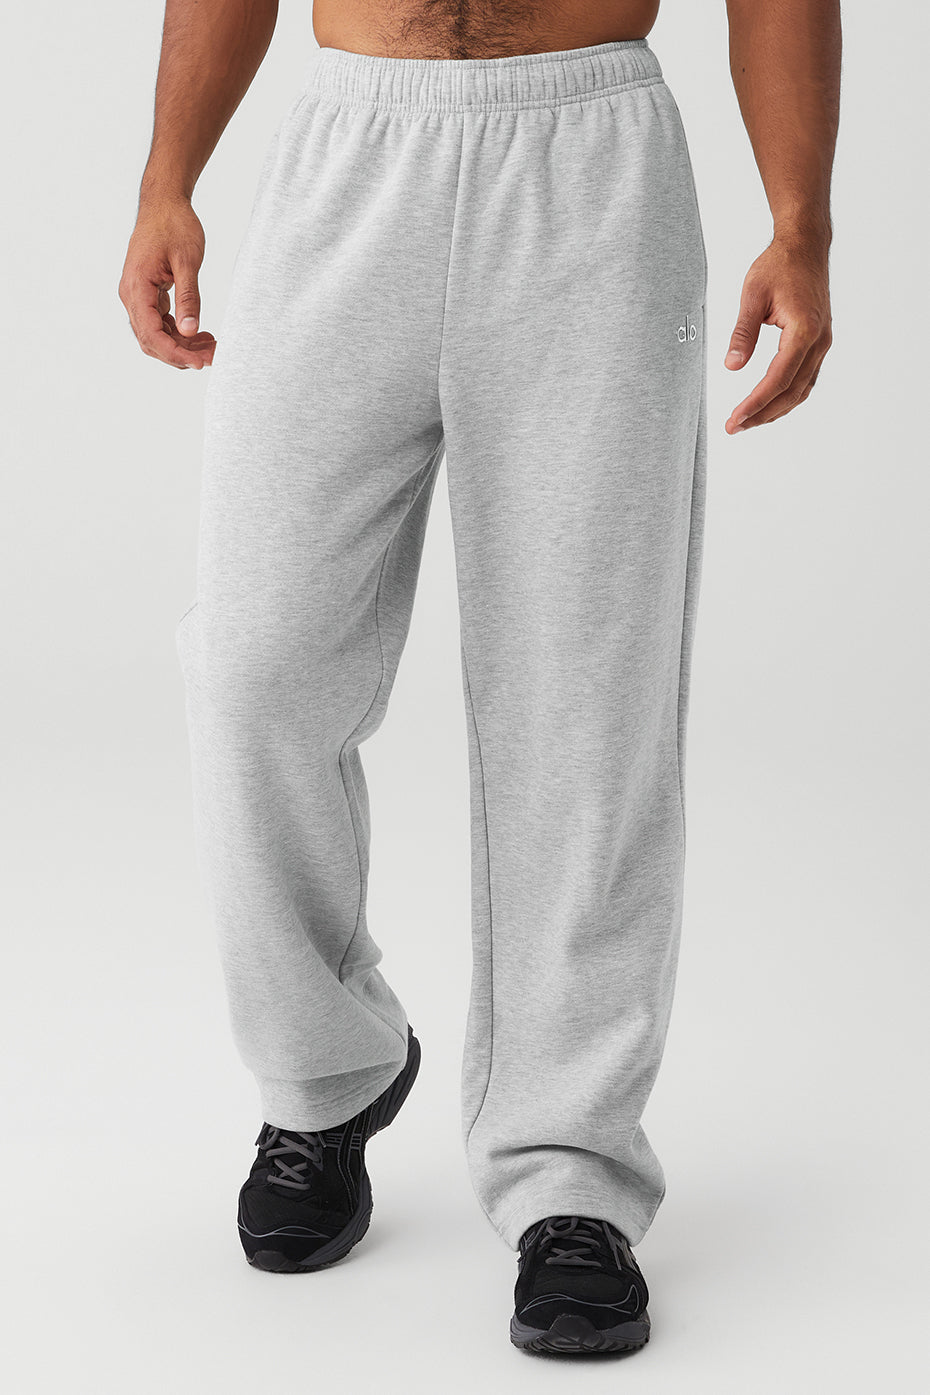 Russell Athletic White Boys Basketball Tear-Away Pants